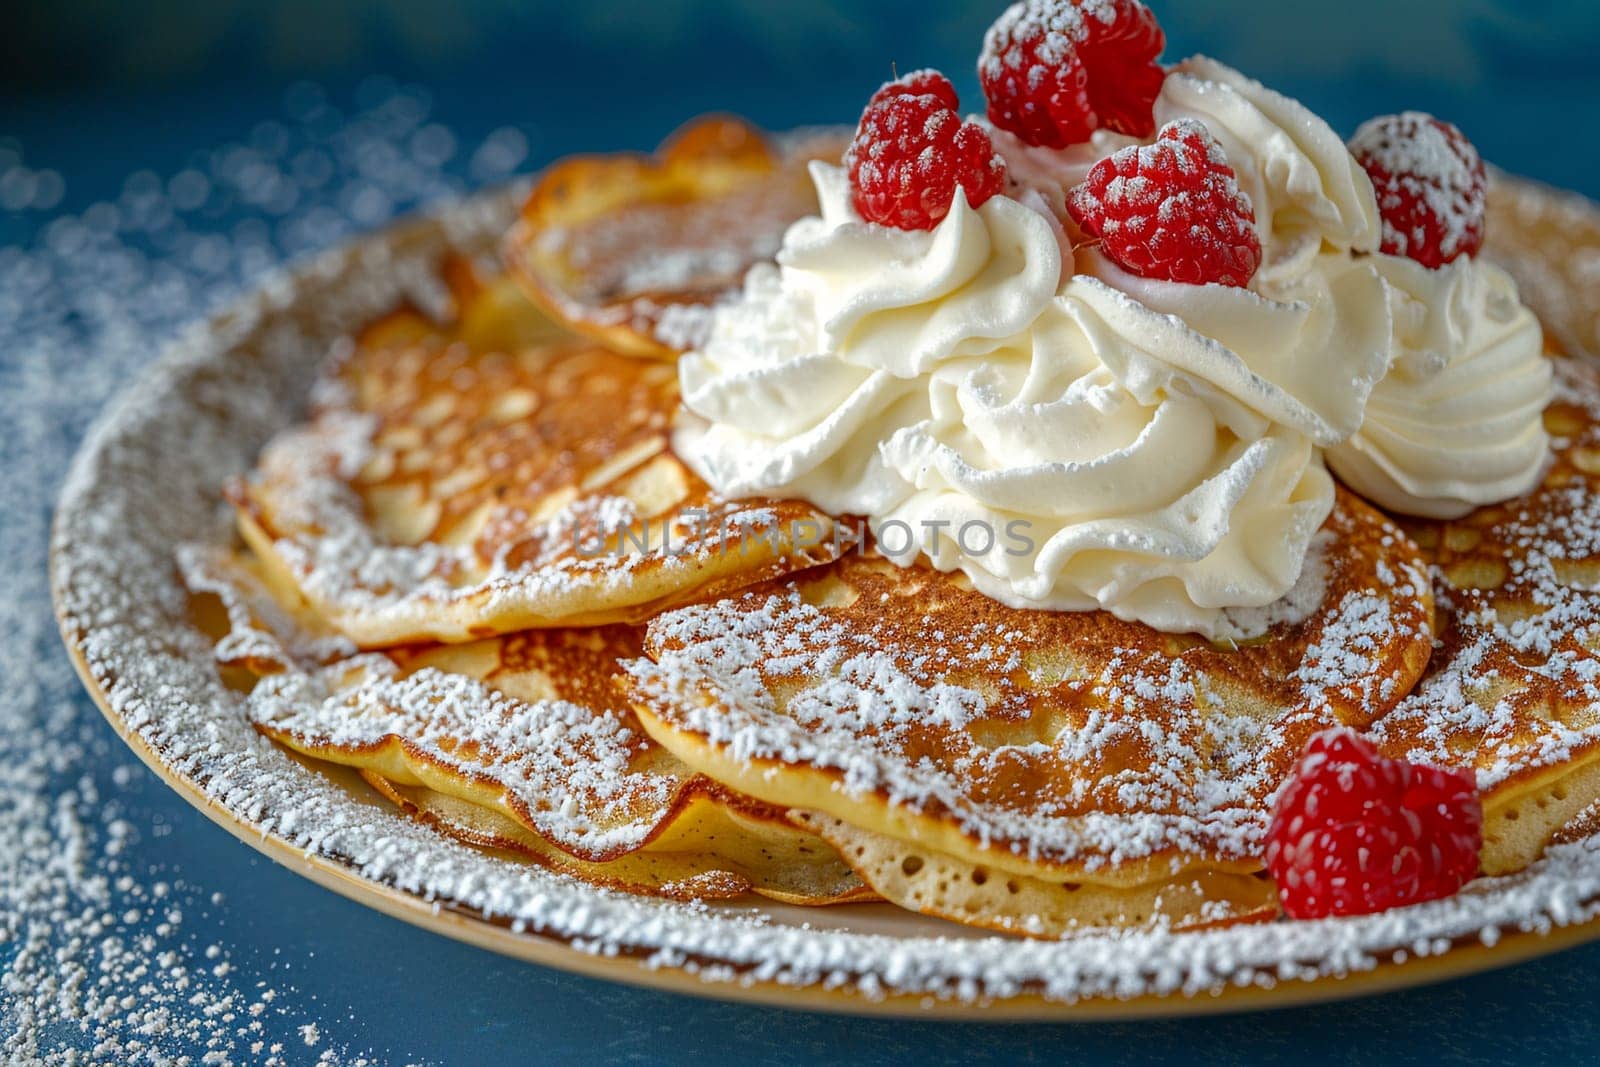 Close-up of delicious pancakes topped with whipped cream, fresh raspberries, and a dusting of powdered sugar on a plate.